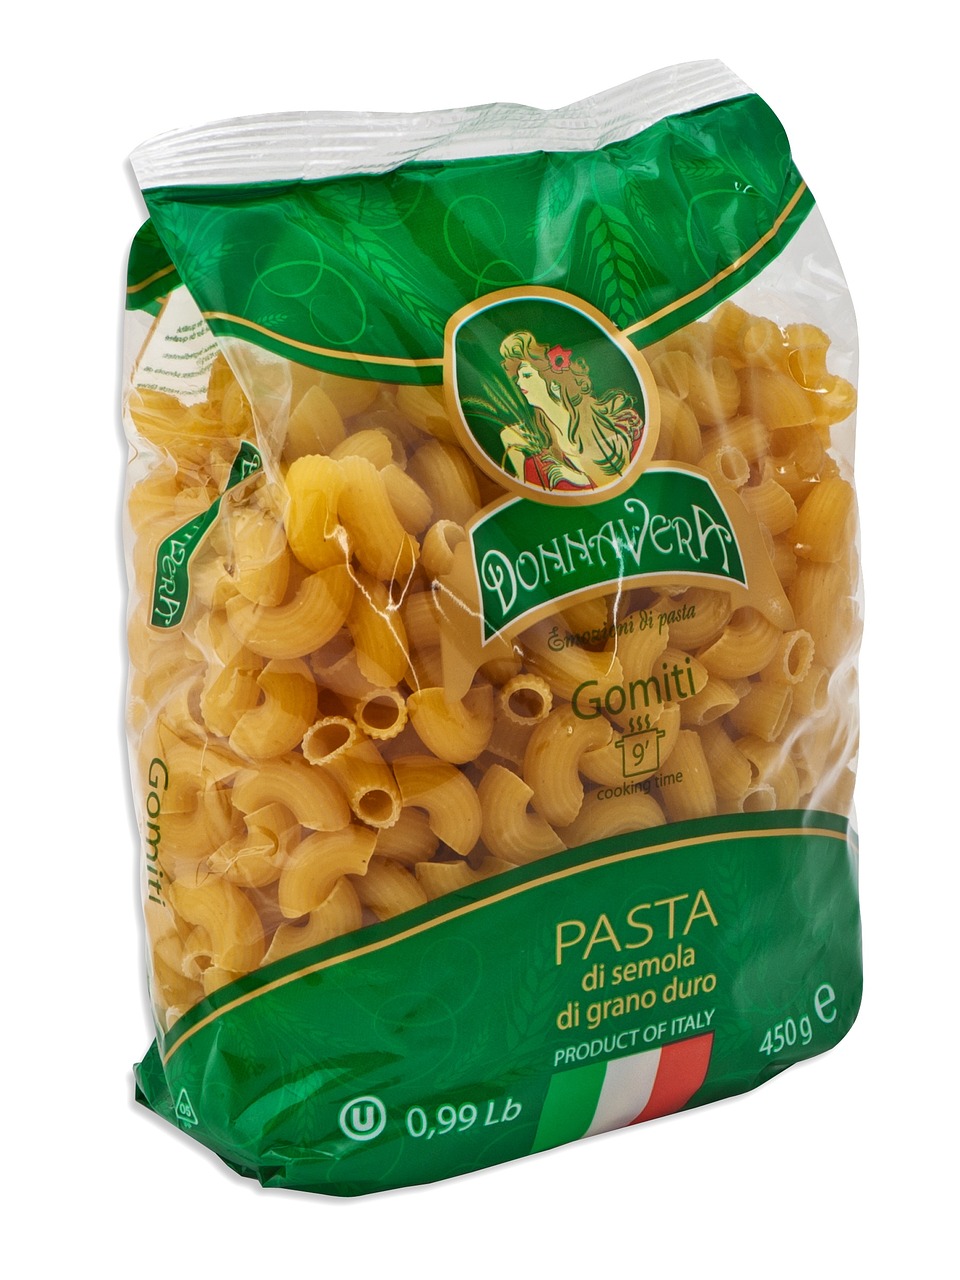 pasta products free pictures free photo